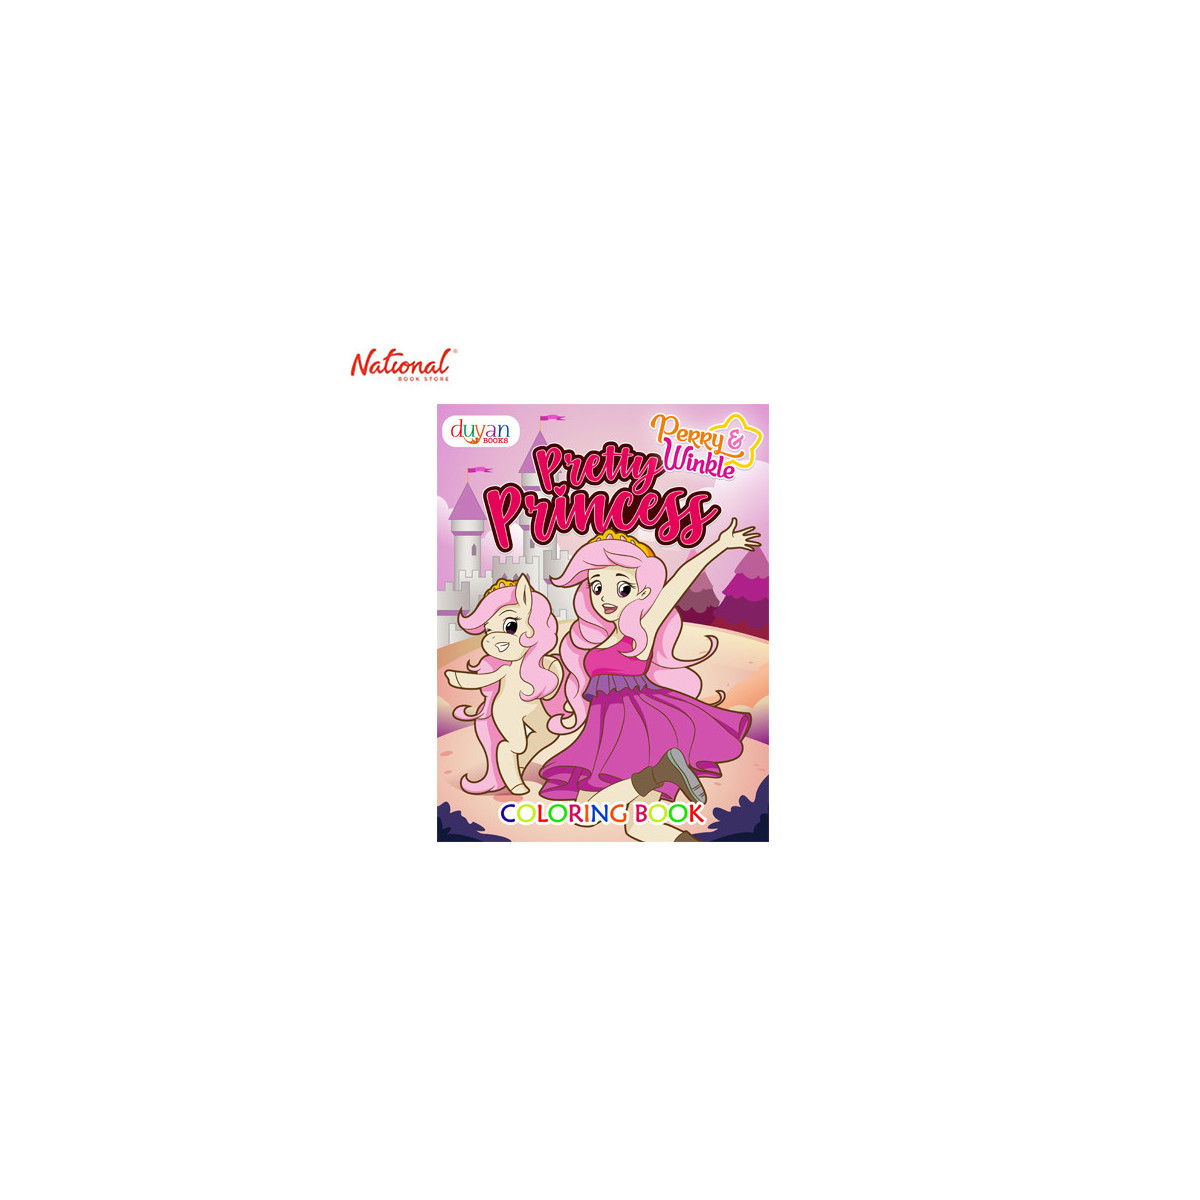 PERRY AND WINKLE: PRETTY PRINCESS COLORING BOOK TRADE PAPERBACK